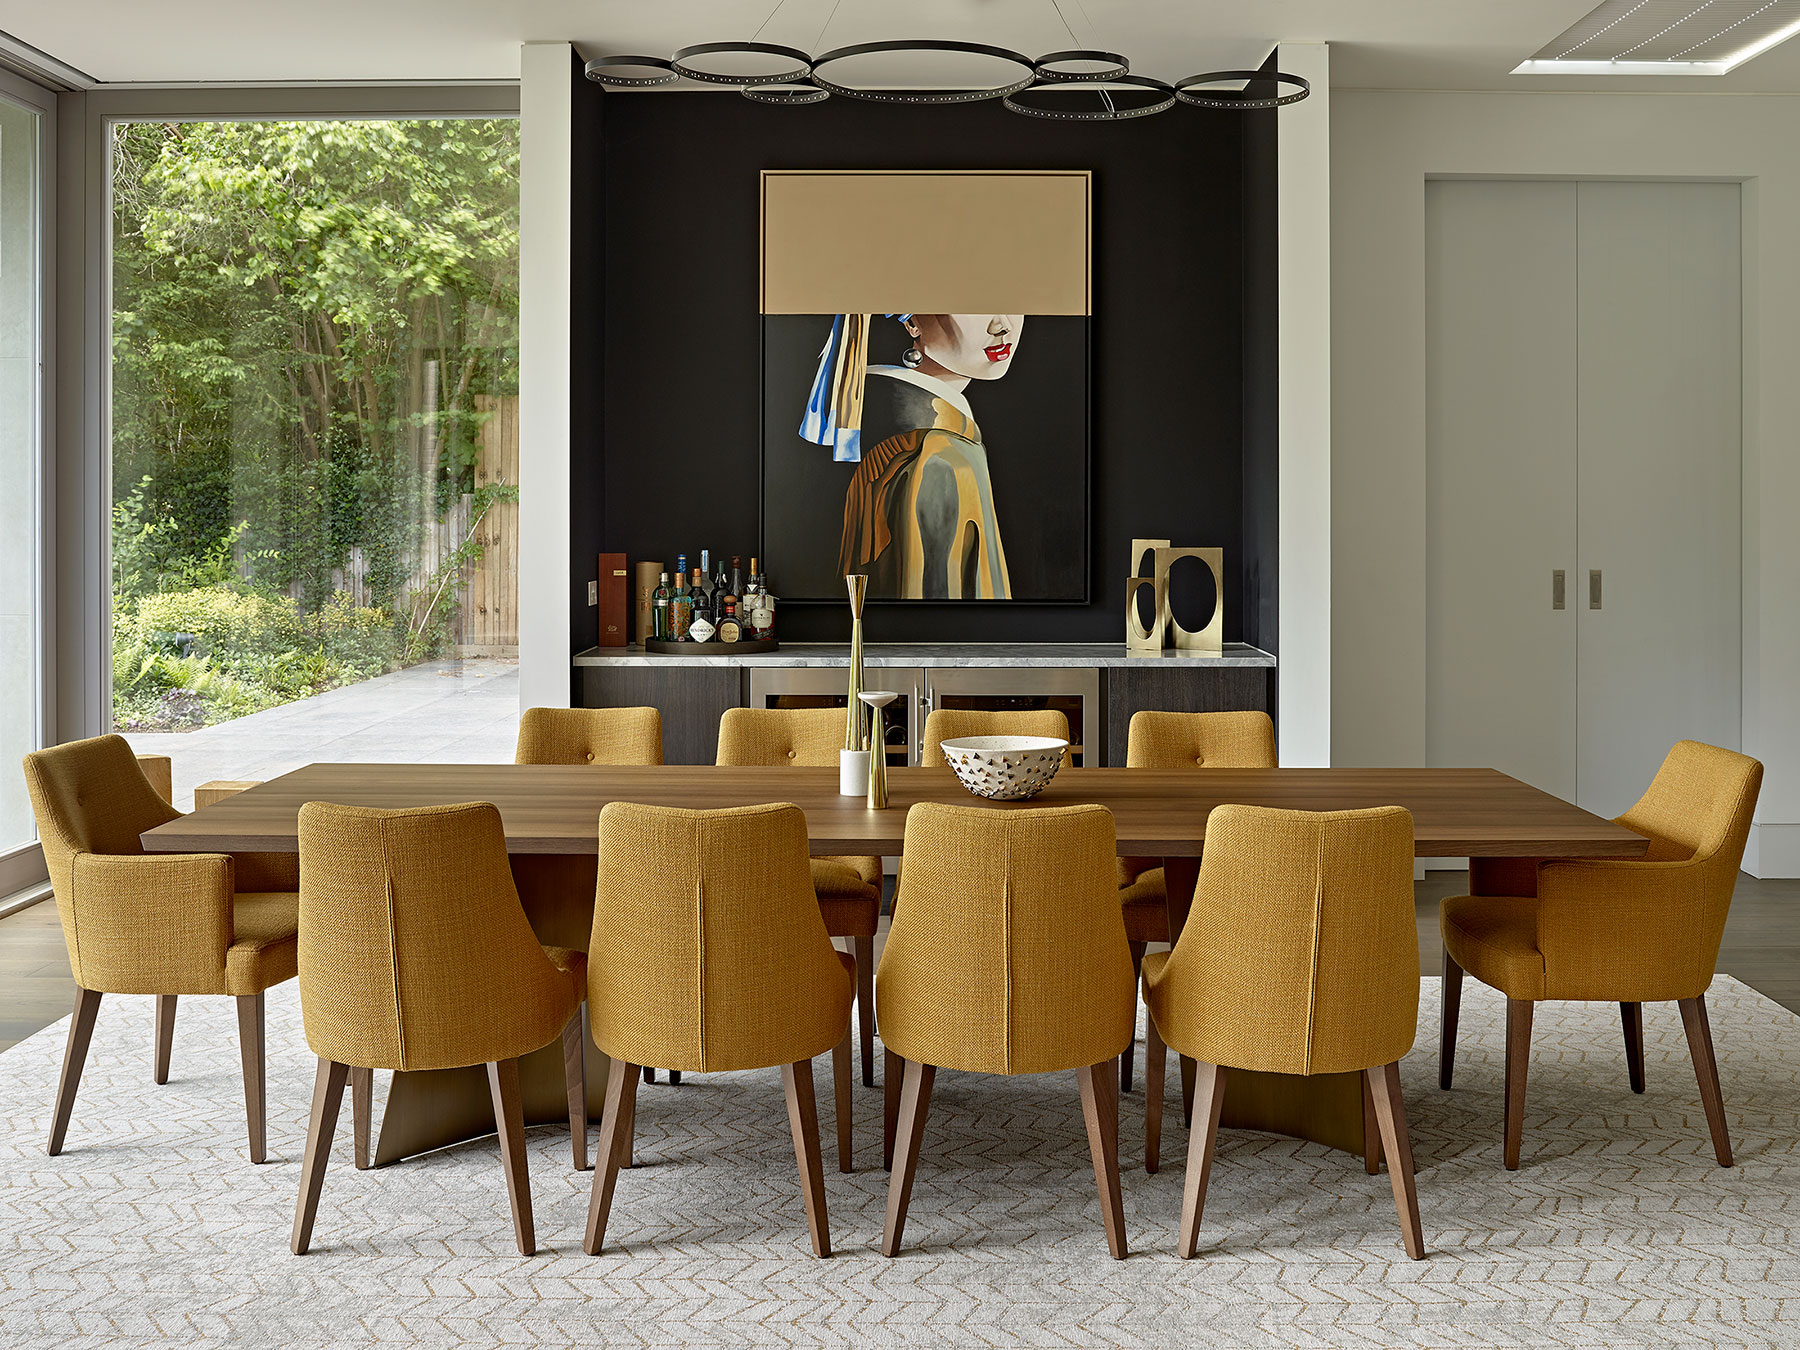 Dining area of open plan living space at LEIVARS project in Esher